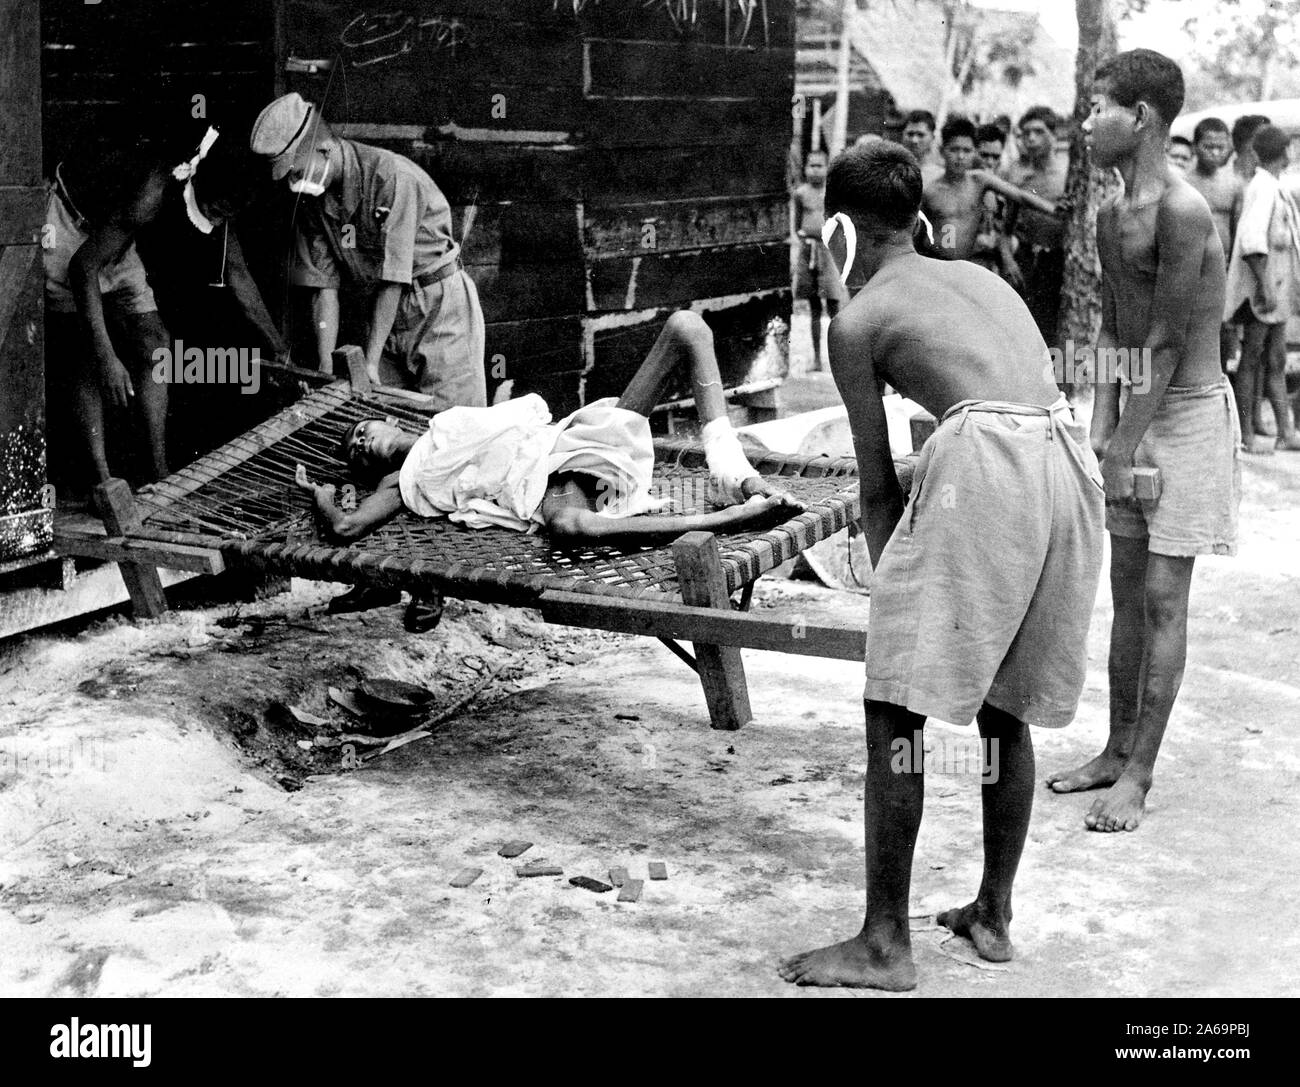 An emaciated coolie too weak to walk is carried on a charpoy by fellow-coolies at the Japanese labor camp at Seletah, in the northern part of Singapore. Populated by about 1700 persons, including Javanese, the camp was discovered by the British accidentally. With their arrival an effort was made to clean up the camp and administer to the sick. Stock Photo